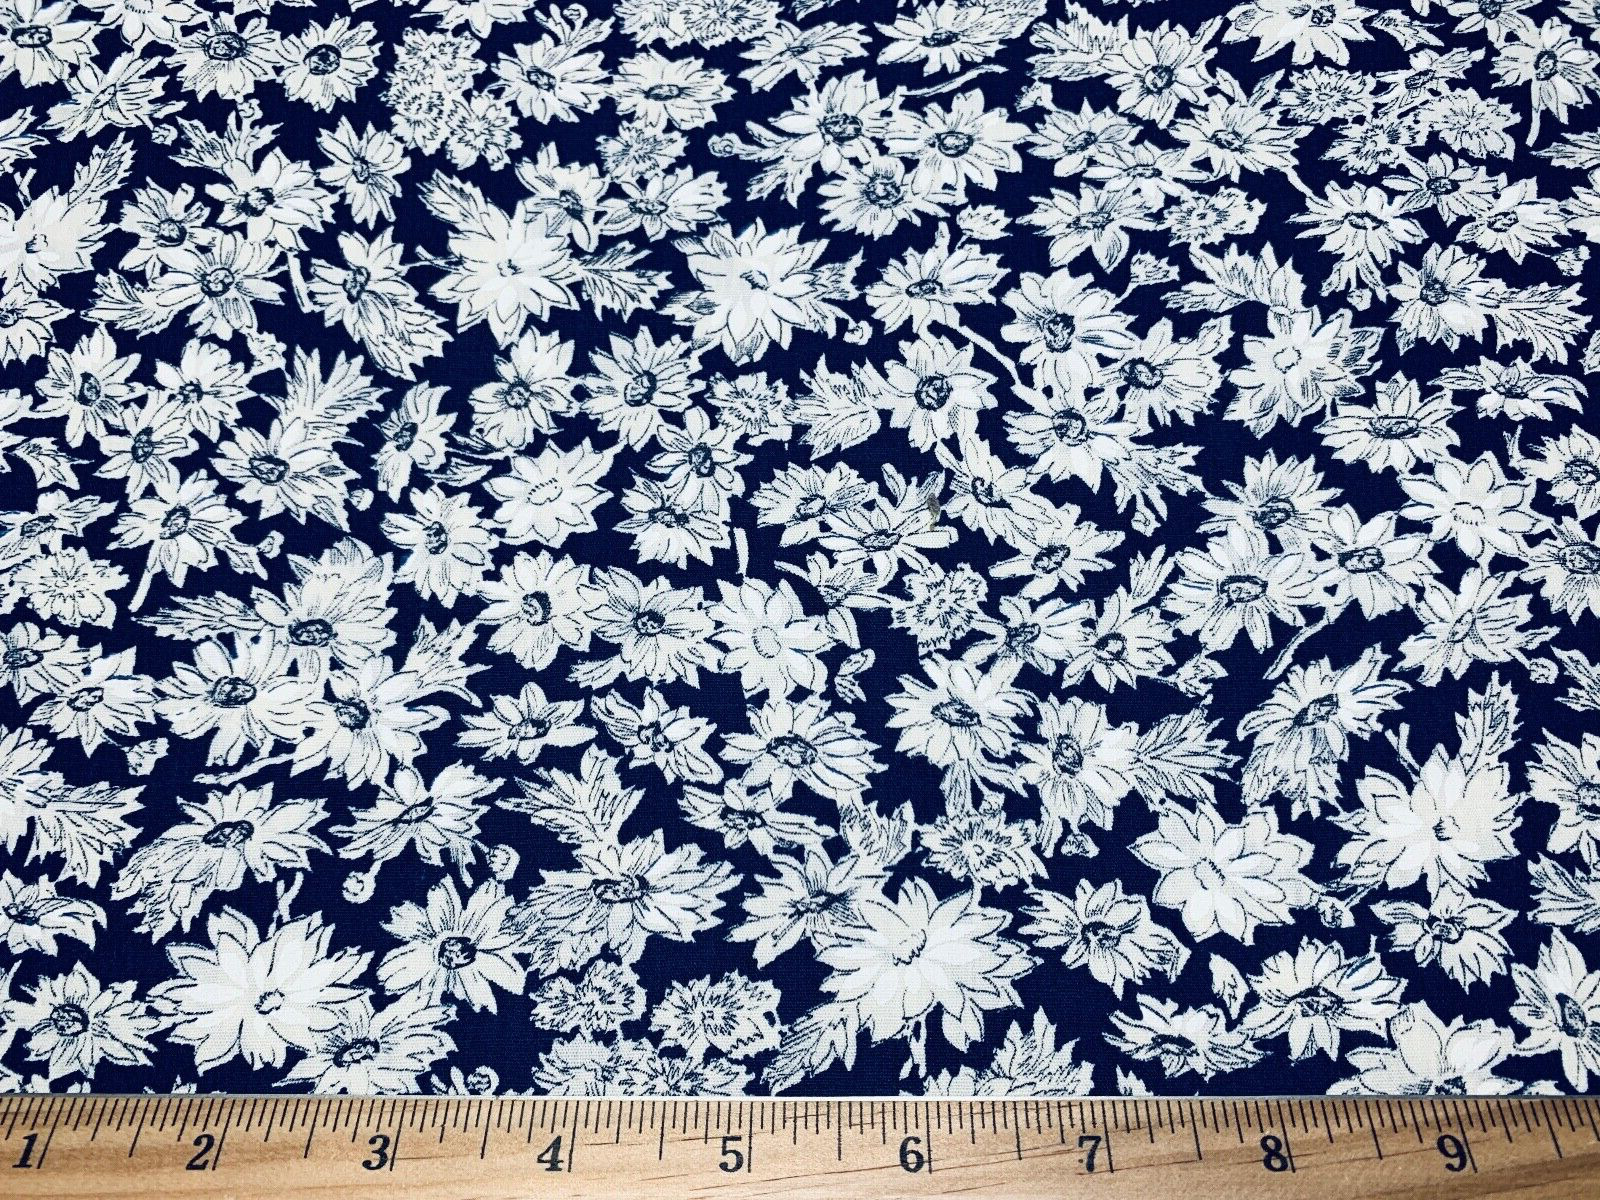 Vintage Cotton Fabric 40s 50s PRETTY Blue & White  Daisies Floral 35w 1yd